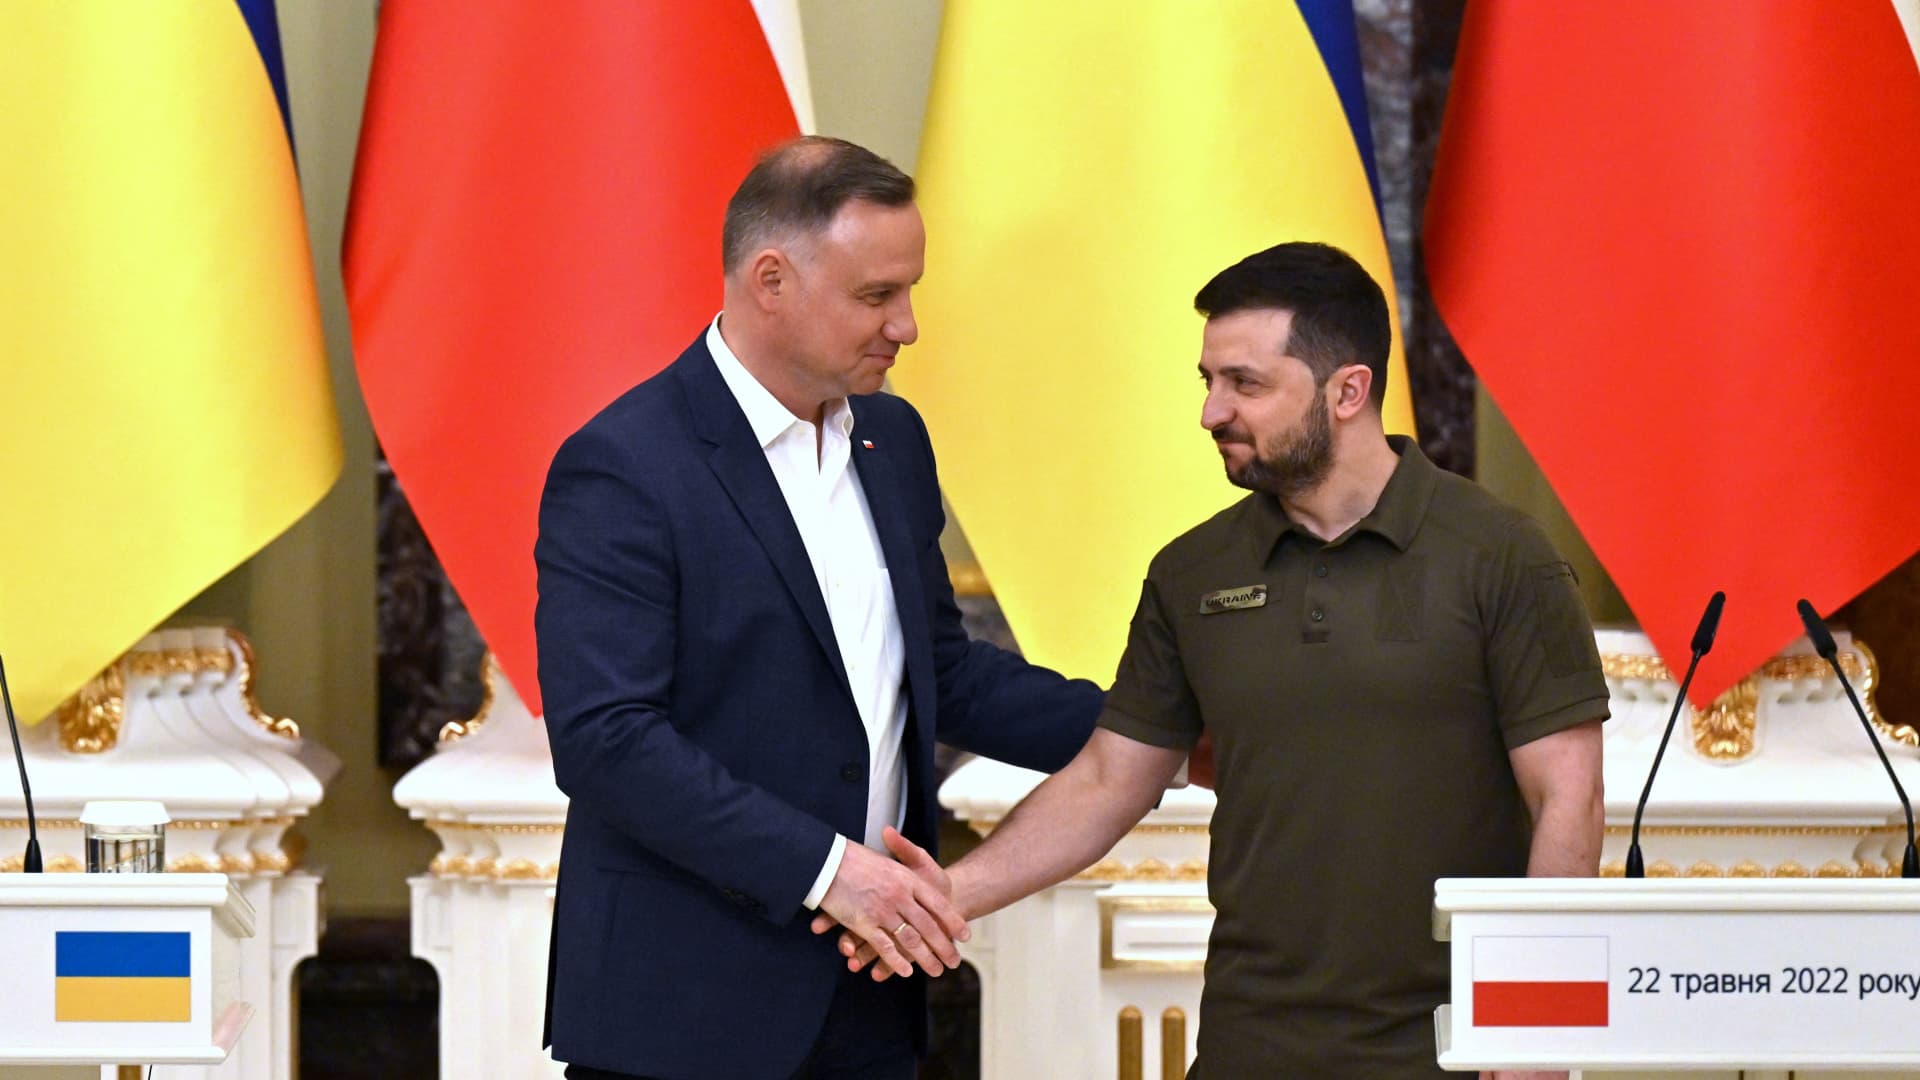 Ukrainian President Volodymyr Zelenskyy and his Polish counterpart Andrzej Duda shake hands during a press conference following their talks in Kyiv on May 22, 2022. Ukraine and Poland have agreed to work on joint border controls as well as a shared railway company to relieve the movement of people and grow Ukraine's export potential, Reuters reported.